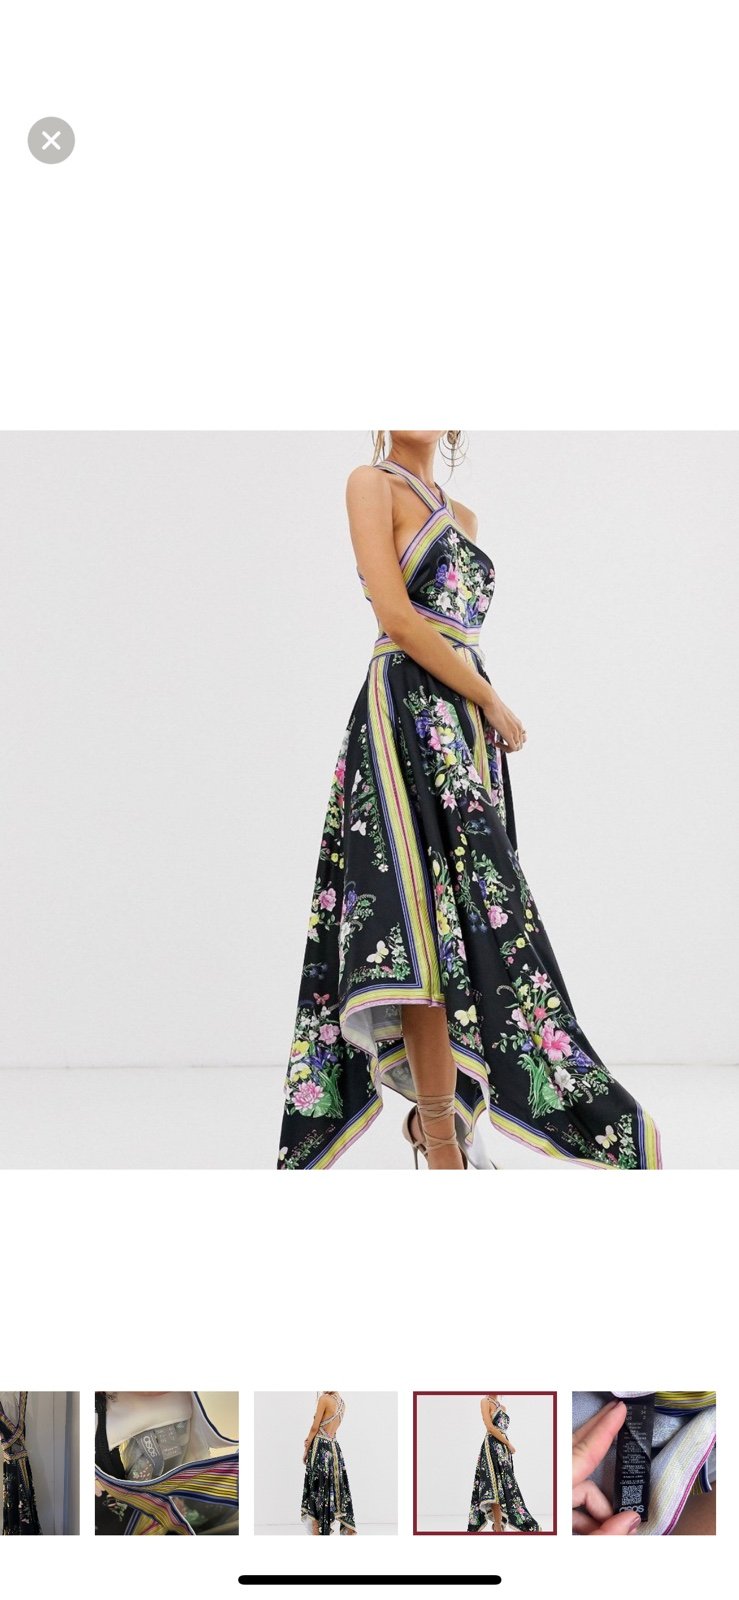 Comfortable ASOS EDITION Scarf print halter midi dress with cutout sides nRZc0W9cr just buy it